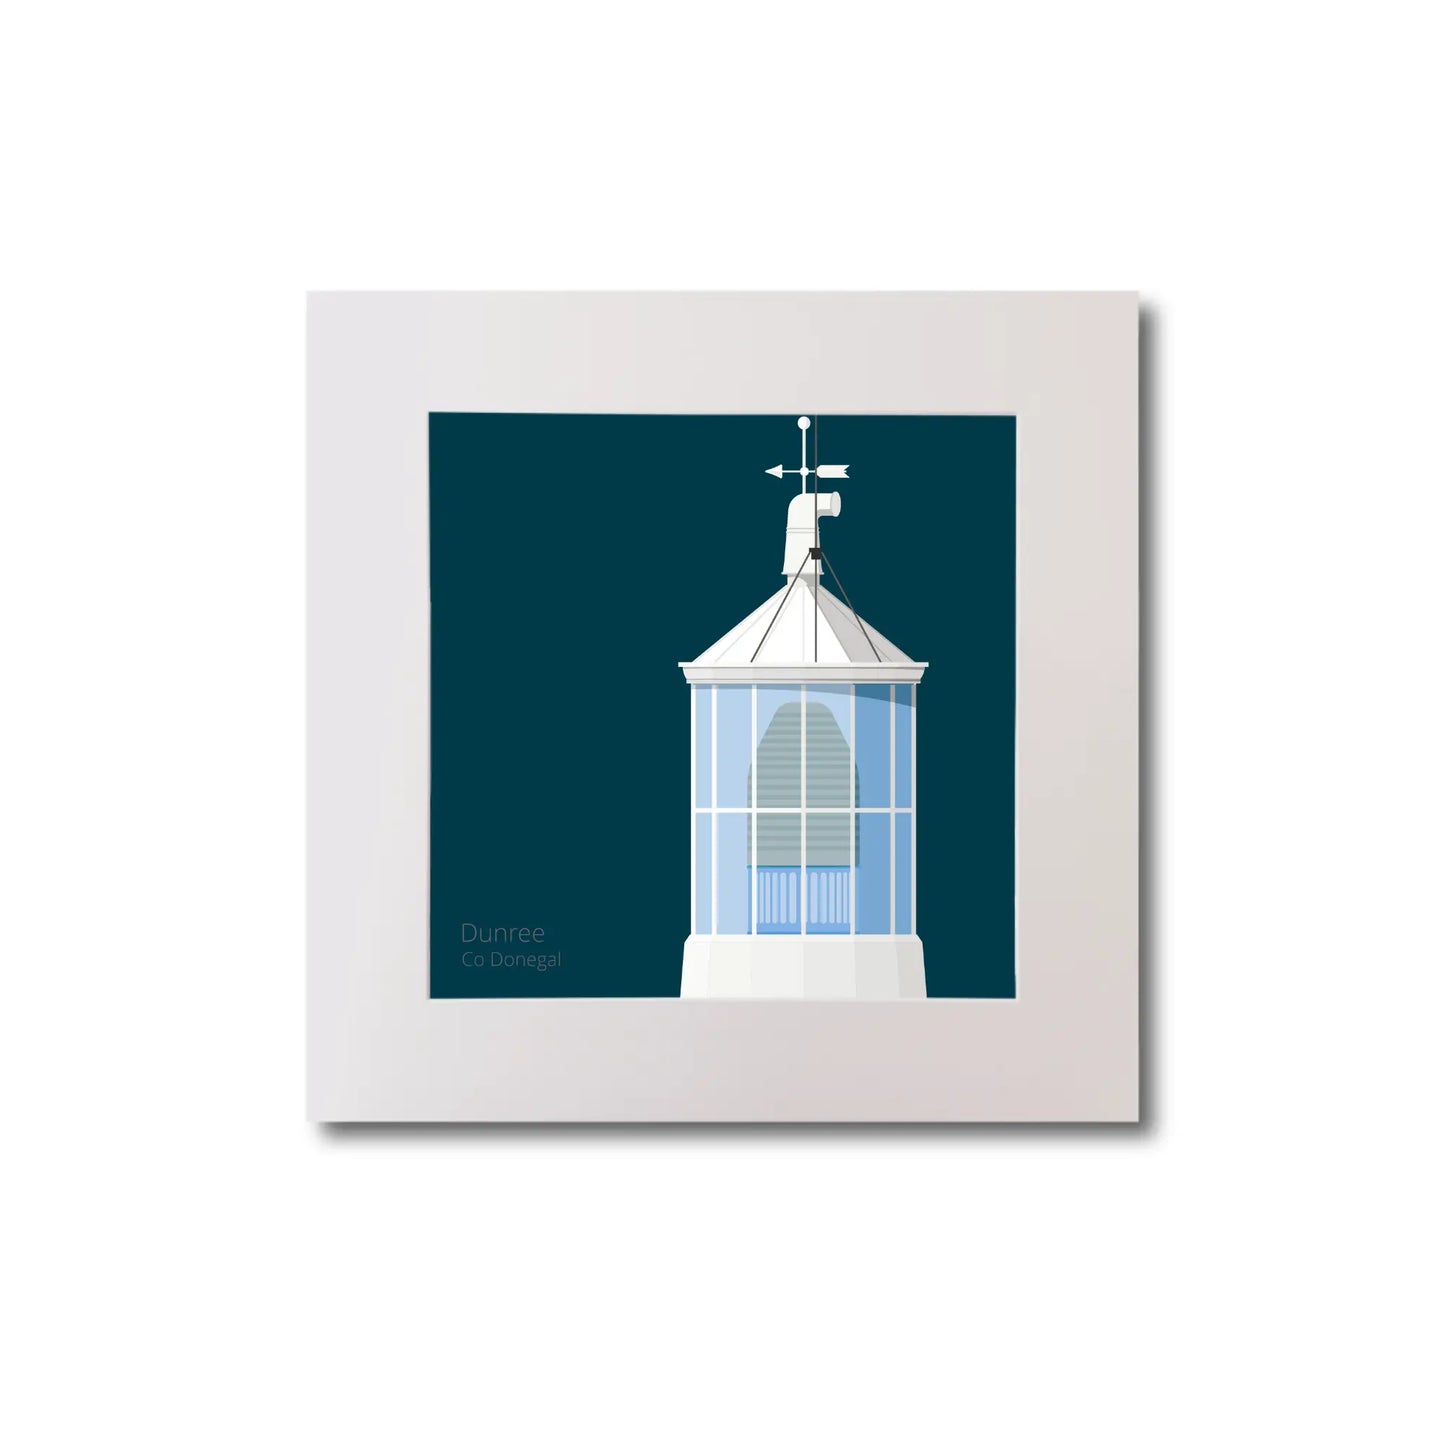 Illustration Dunree lighthouse on a midnight blue background, mounted and measuring 20x20cm.